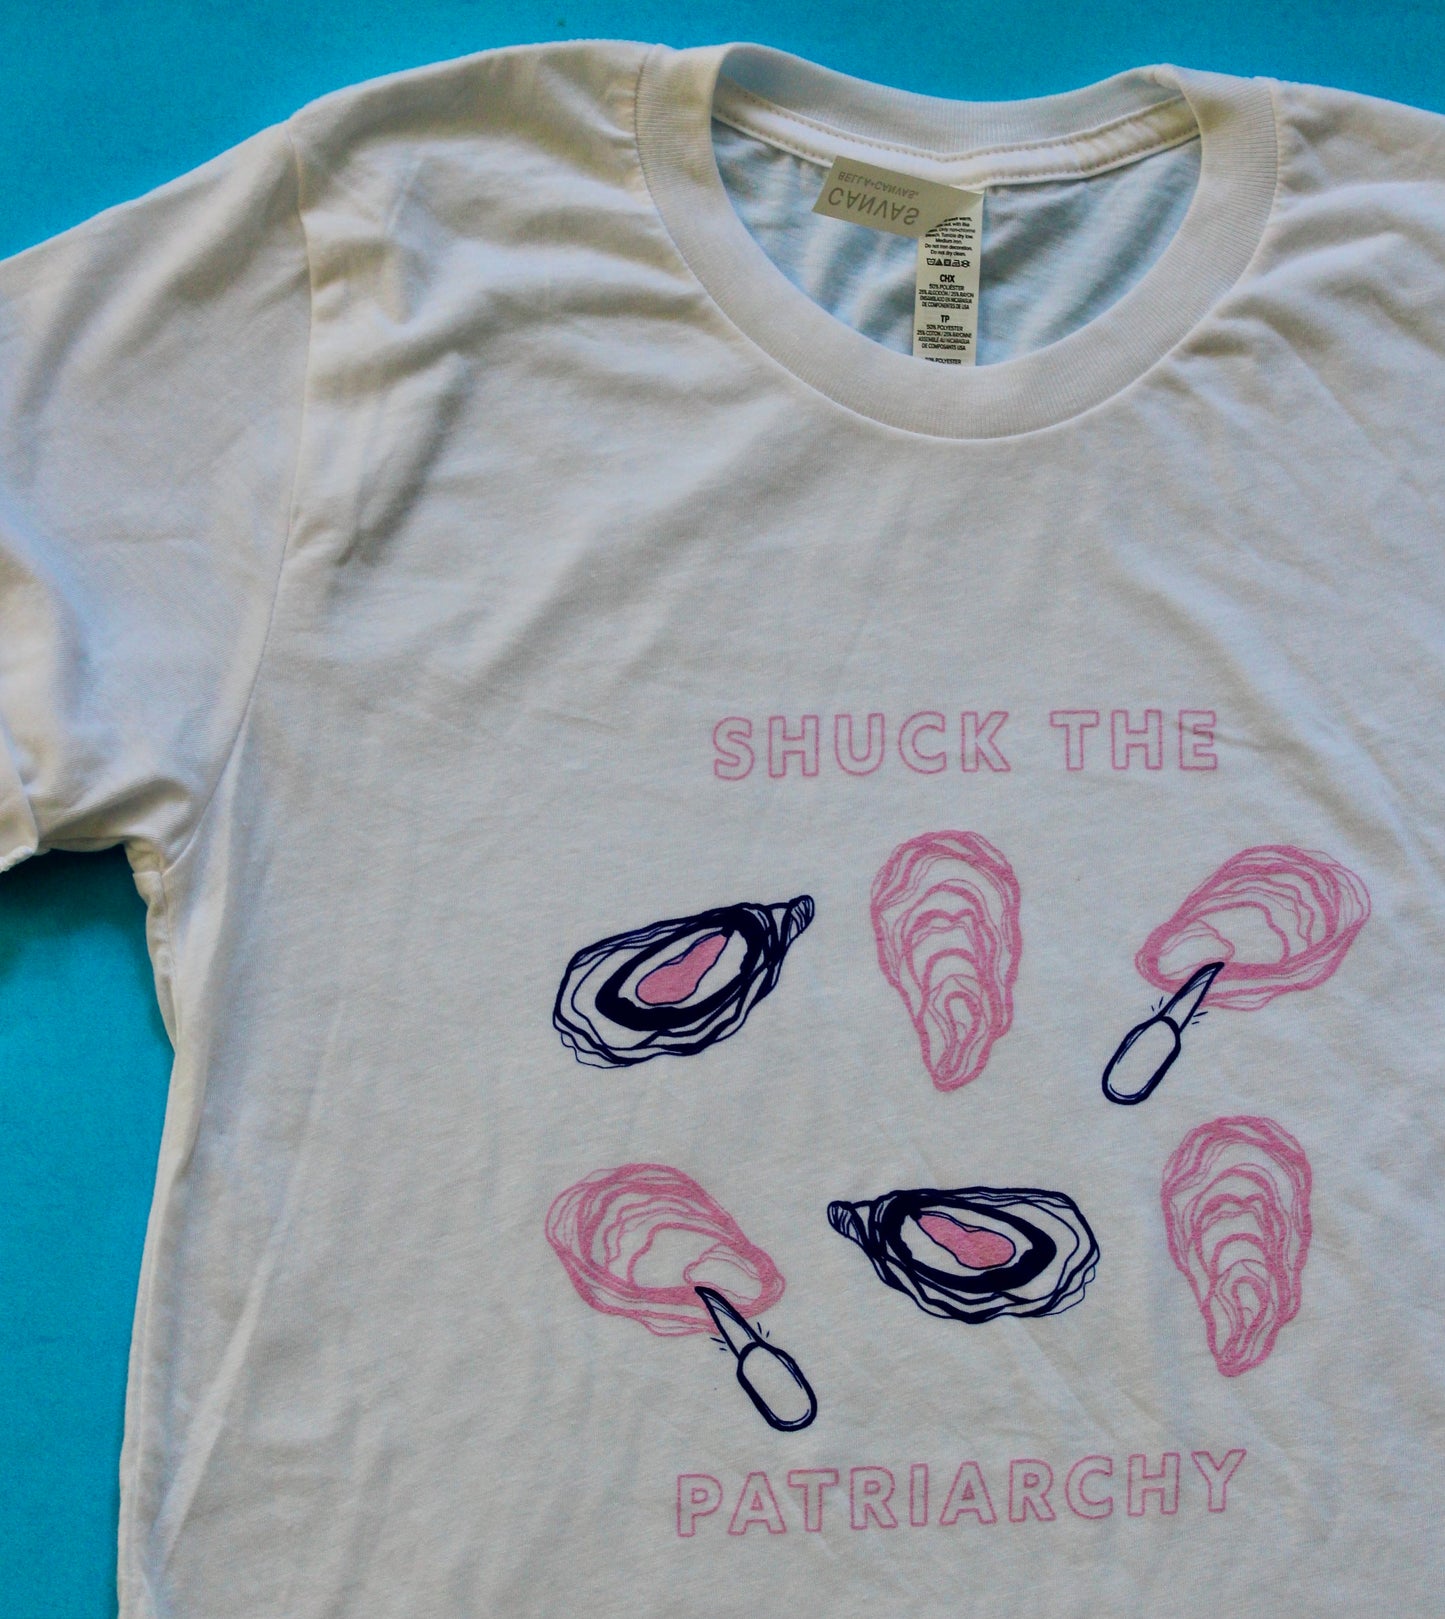 A white tee reads "Shuck the Patriarchy" in pink block letters with oyster illustrations 